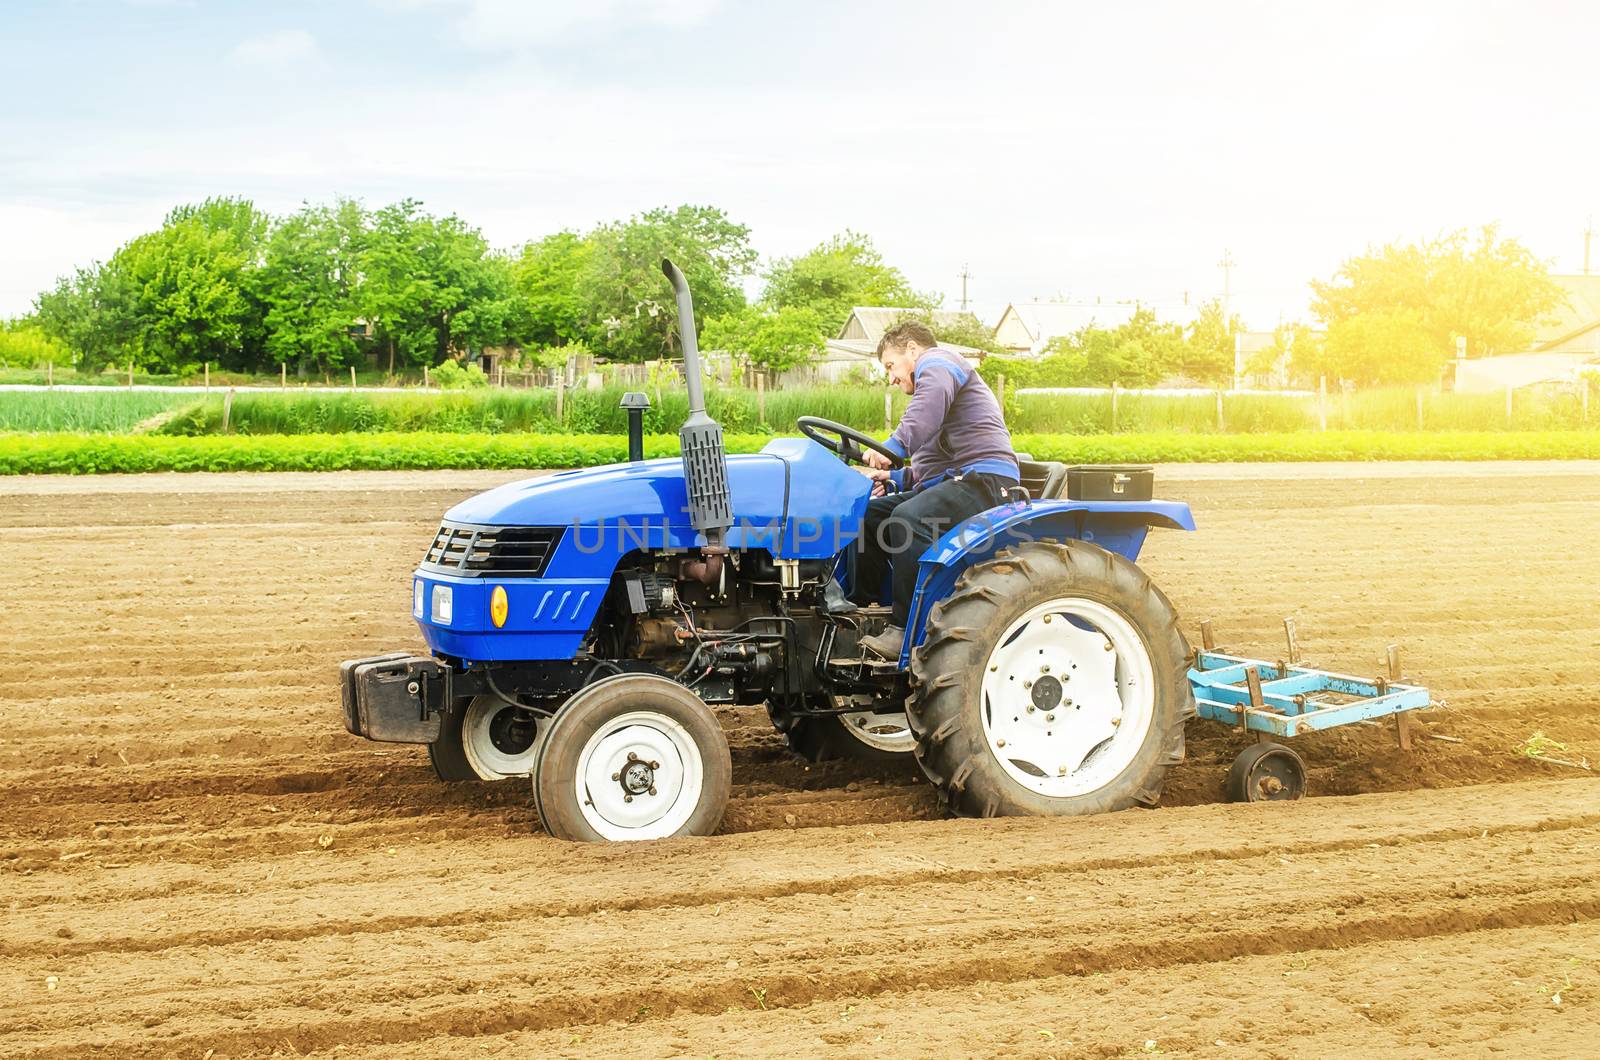 A white caucasian farmer on a tractor making ridges and mounds rows on a farm field. Preparing the land for planting future crop plants. Cultivation of soil for planting. Agroindustry, agribusiness. by iLixe48